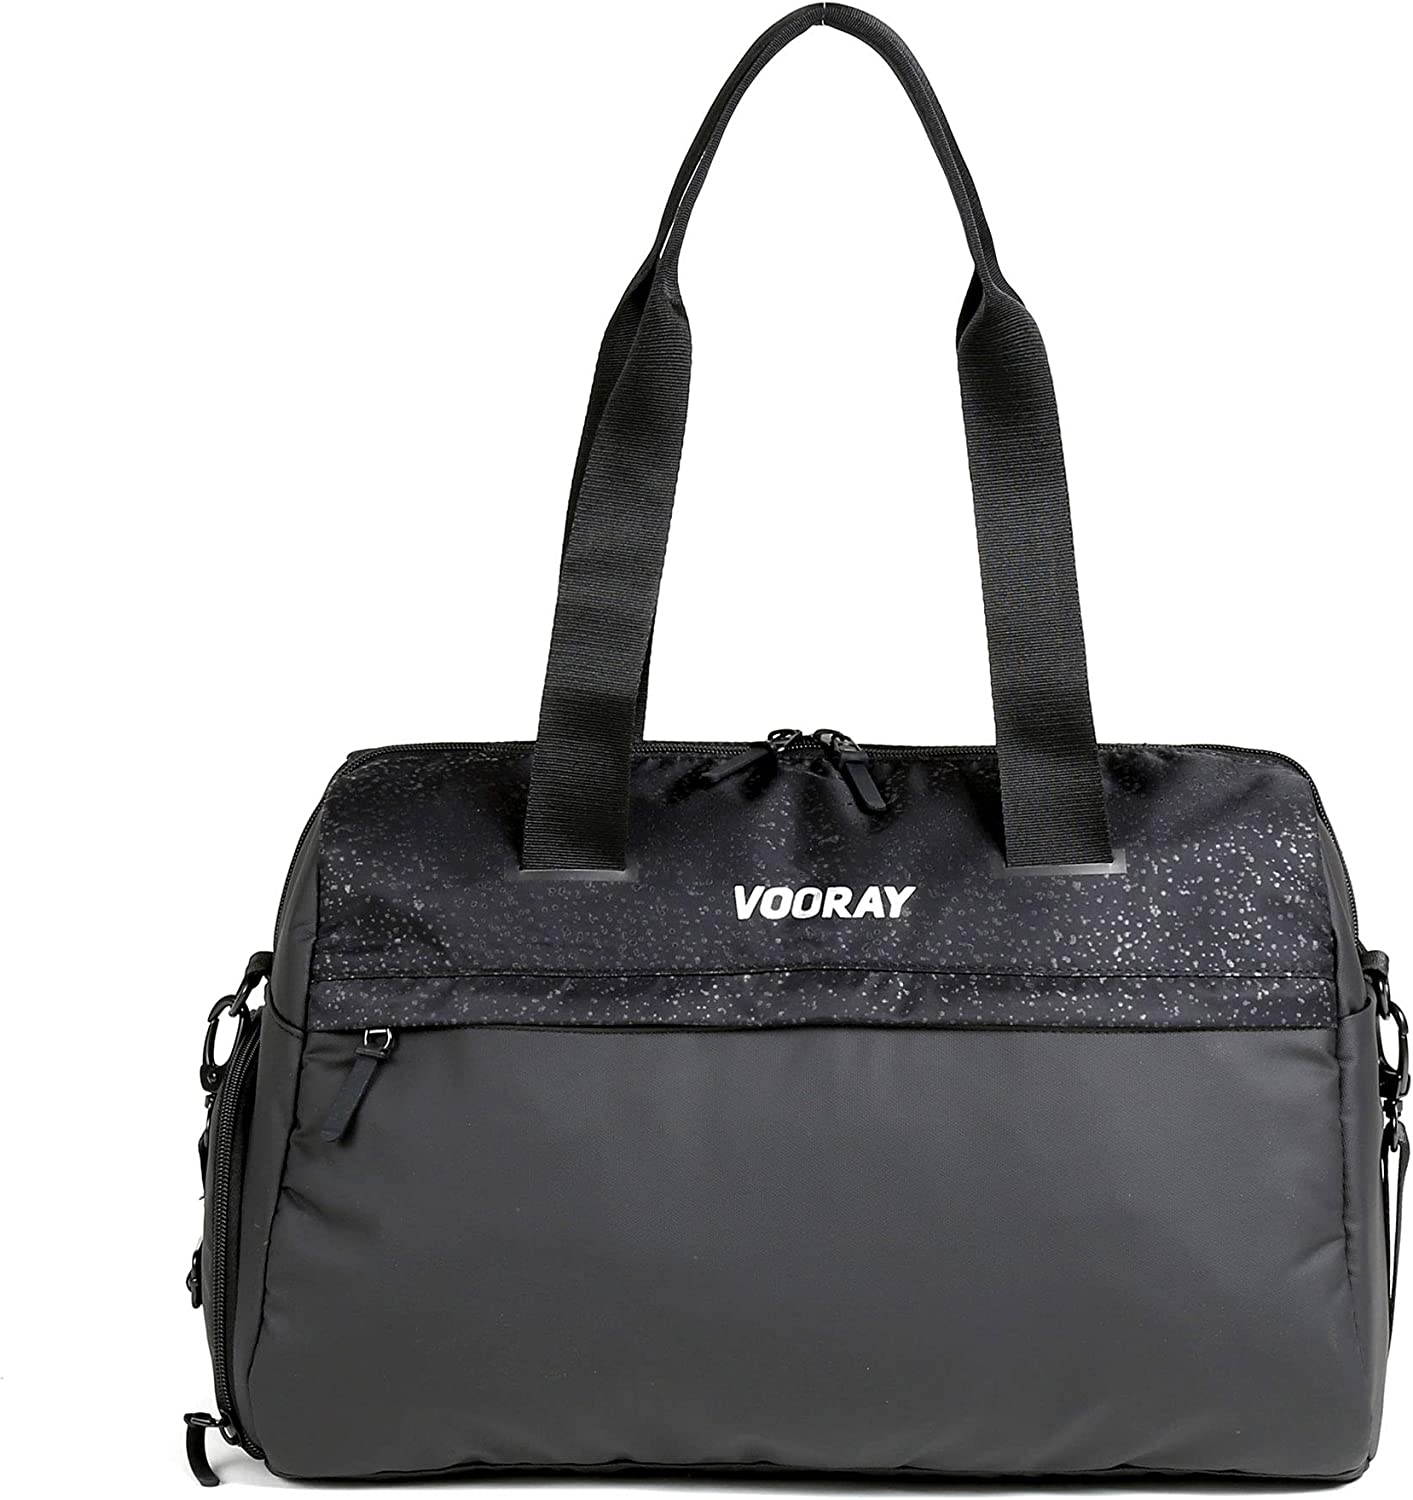 Vooray Trainer Duffle, Water-Resistant Gym Bag with Shoe Compartment and Wet-Gear Pocket 25L (Black Foil, Trainer (24L))